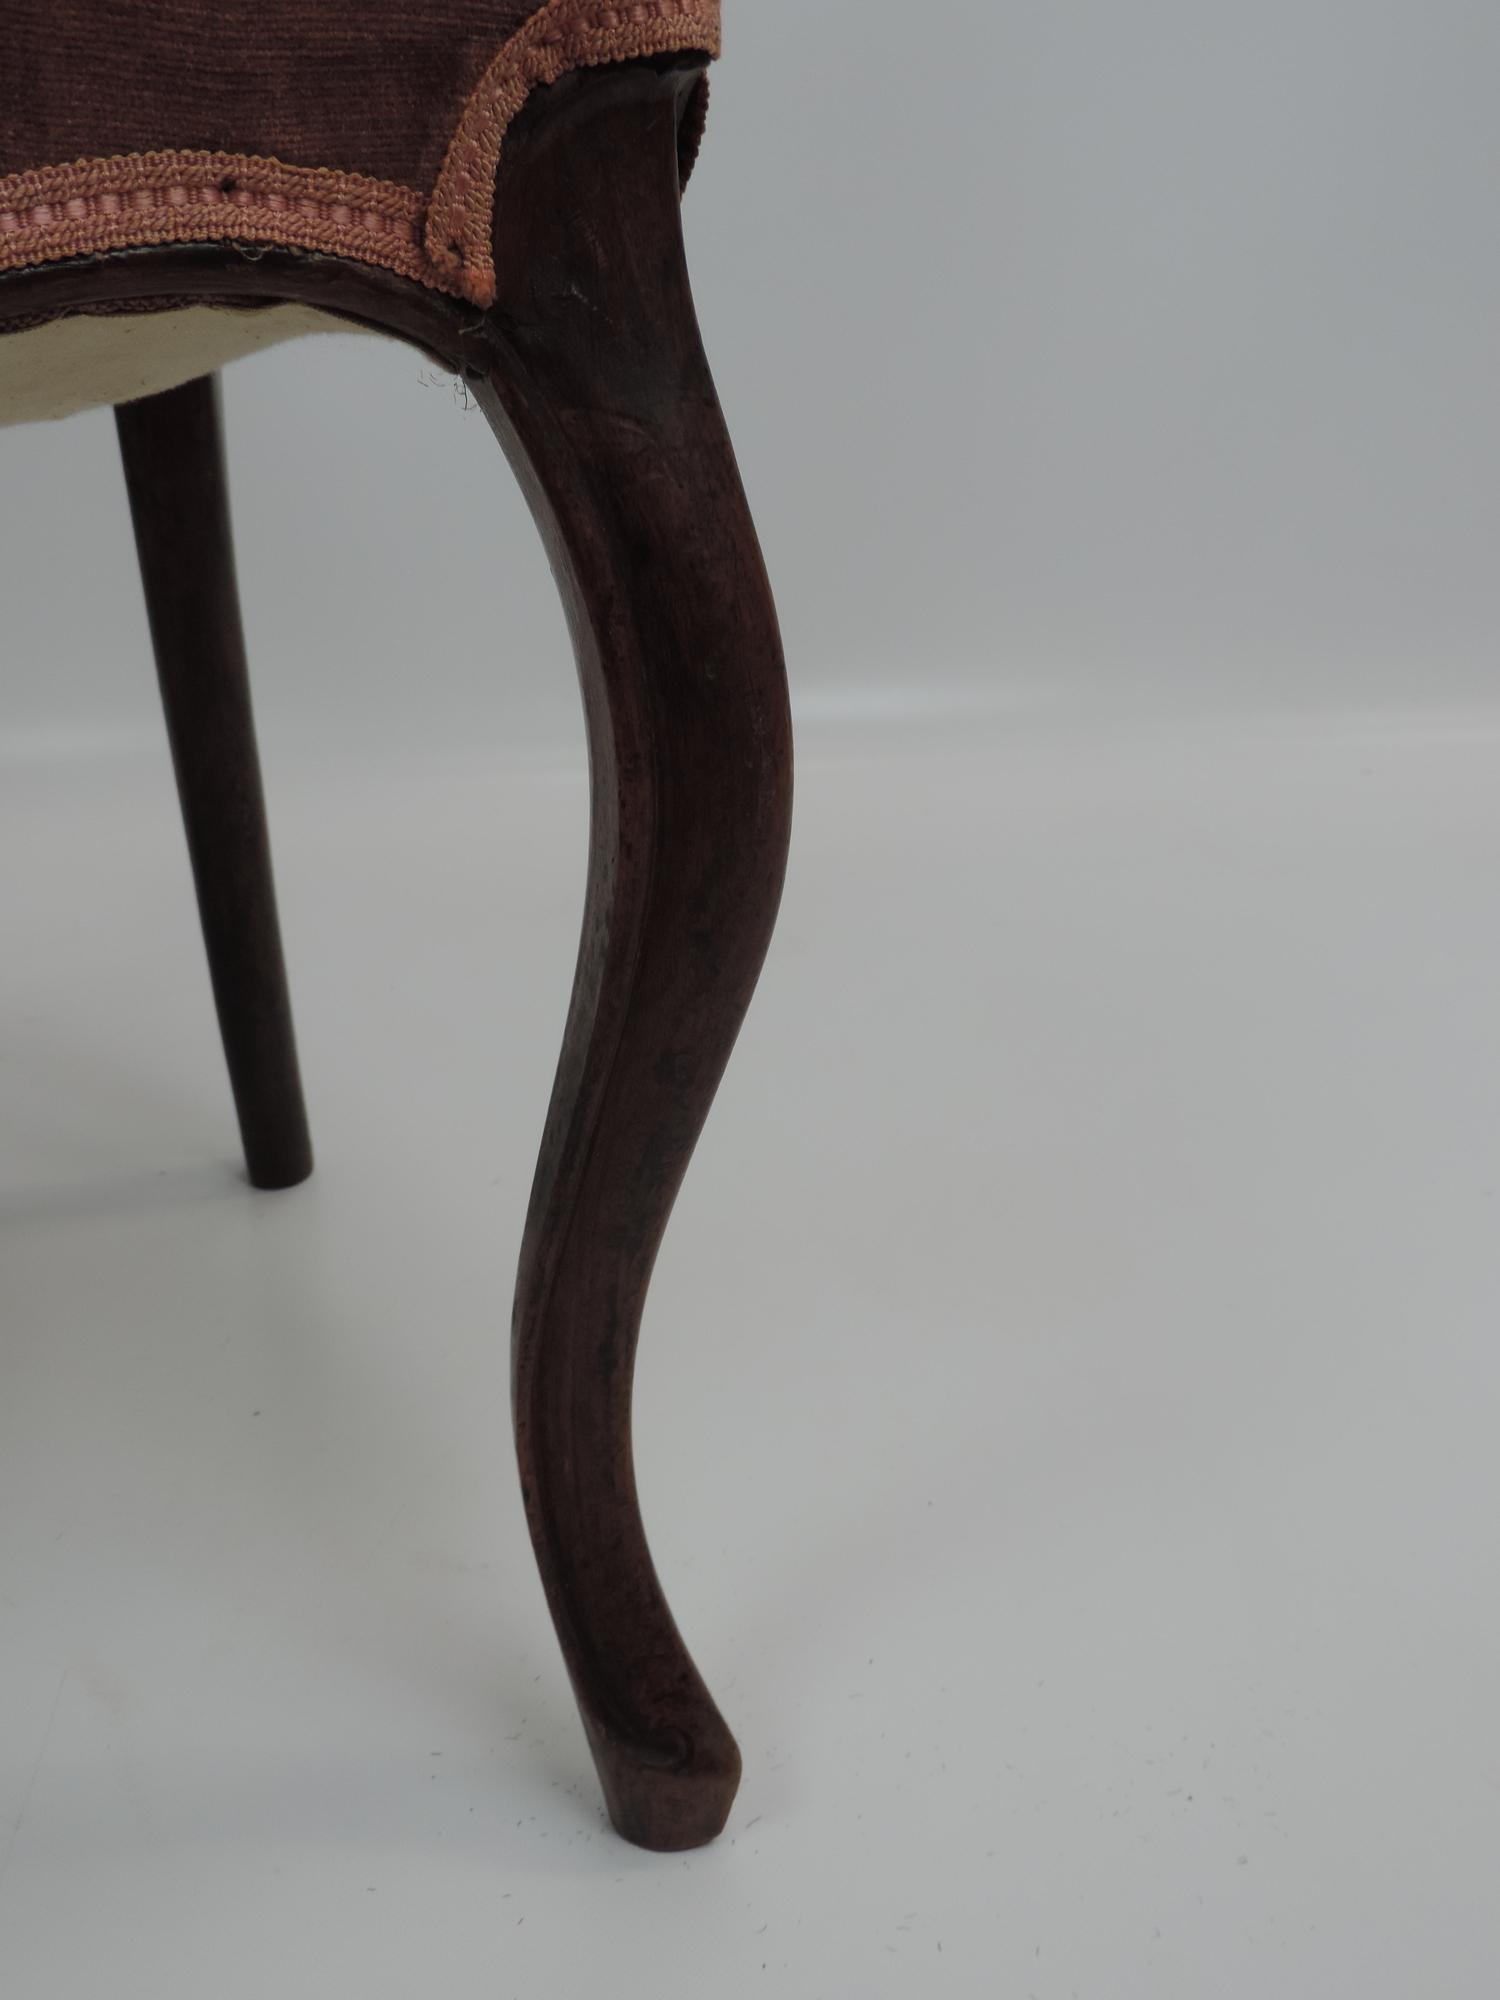 Victorian Balloon Back Dining Chair - Image 6 of 6